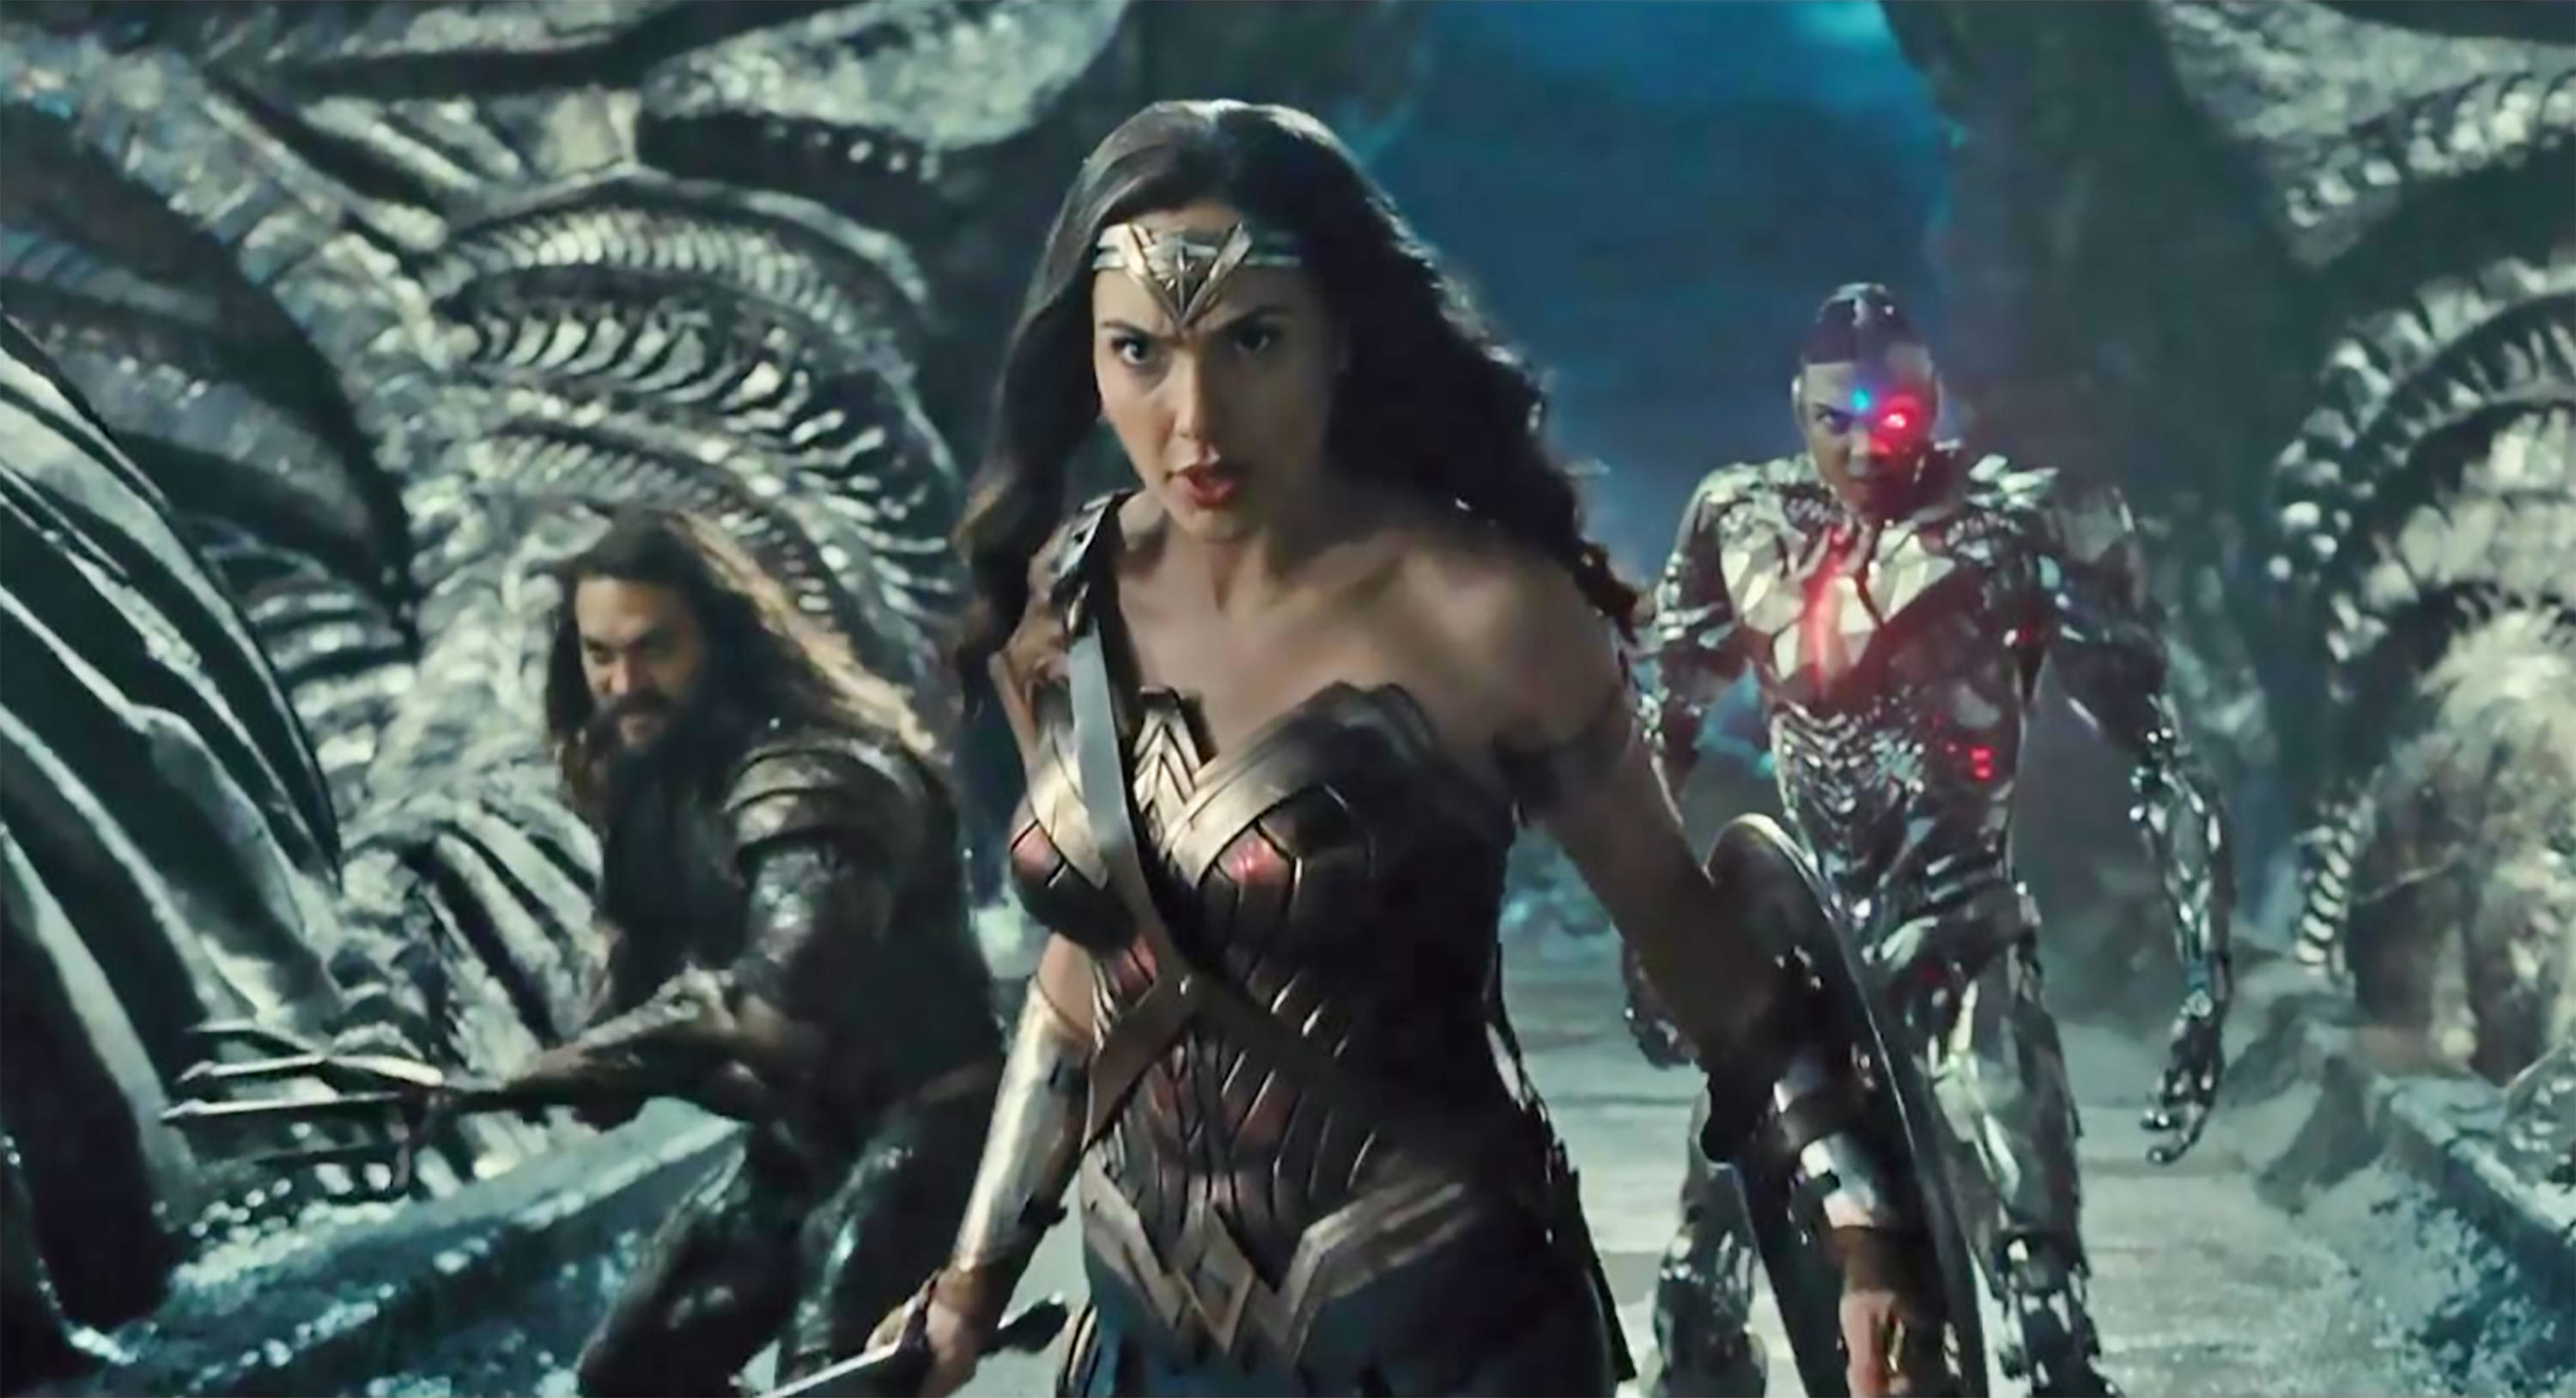 Jason Momoa, Gal Gadot and Ray FIsher ready themselves for combat on an alien vessel